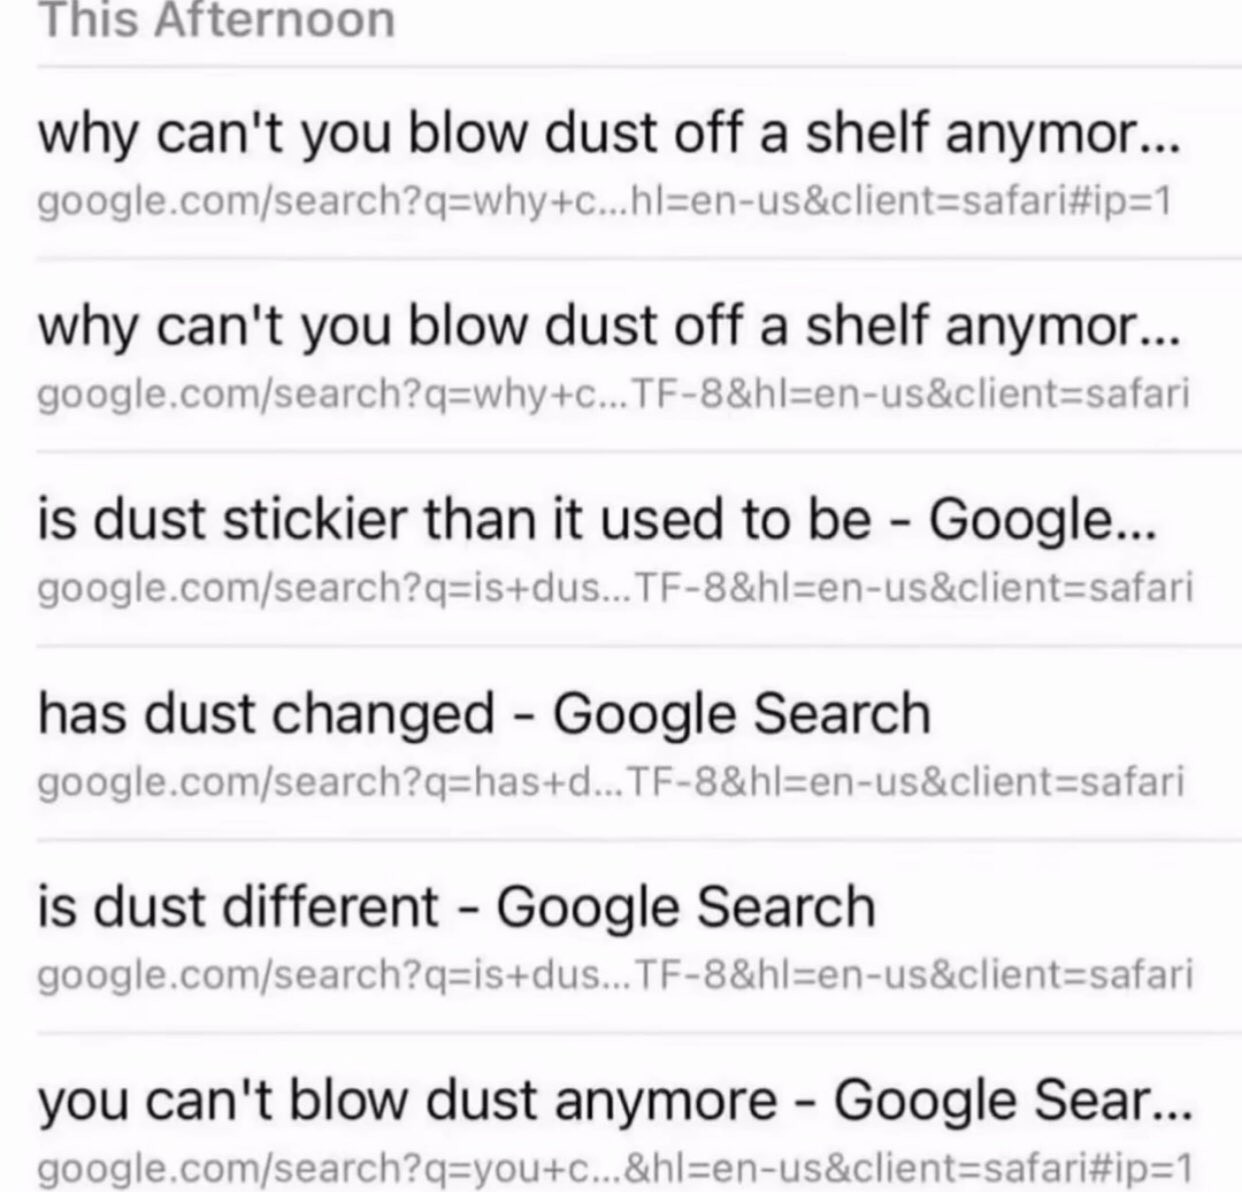 a series of Google searches:
●Why can't you blow dust off a shelf anymore
●is dust stickier than it used to be
●has dust changed
●is dust different 
●you can't blow dust anymore